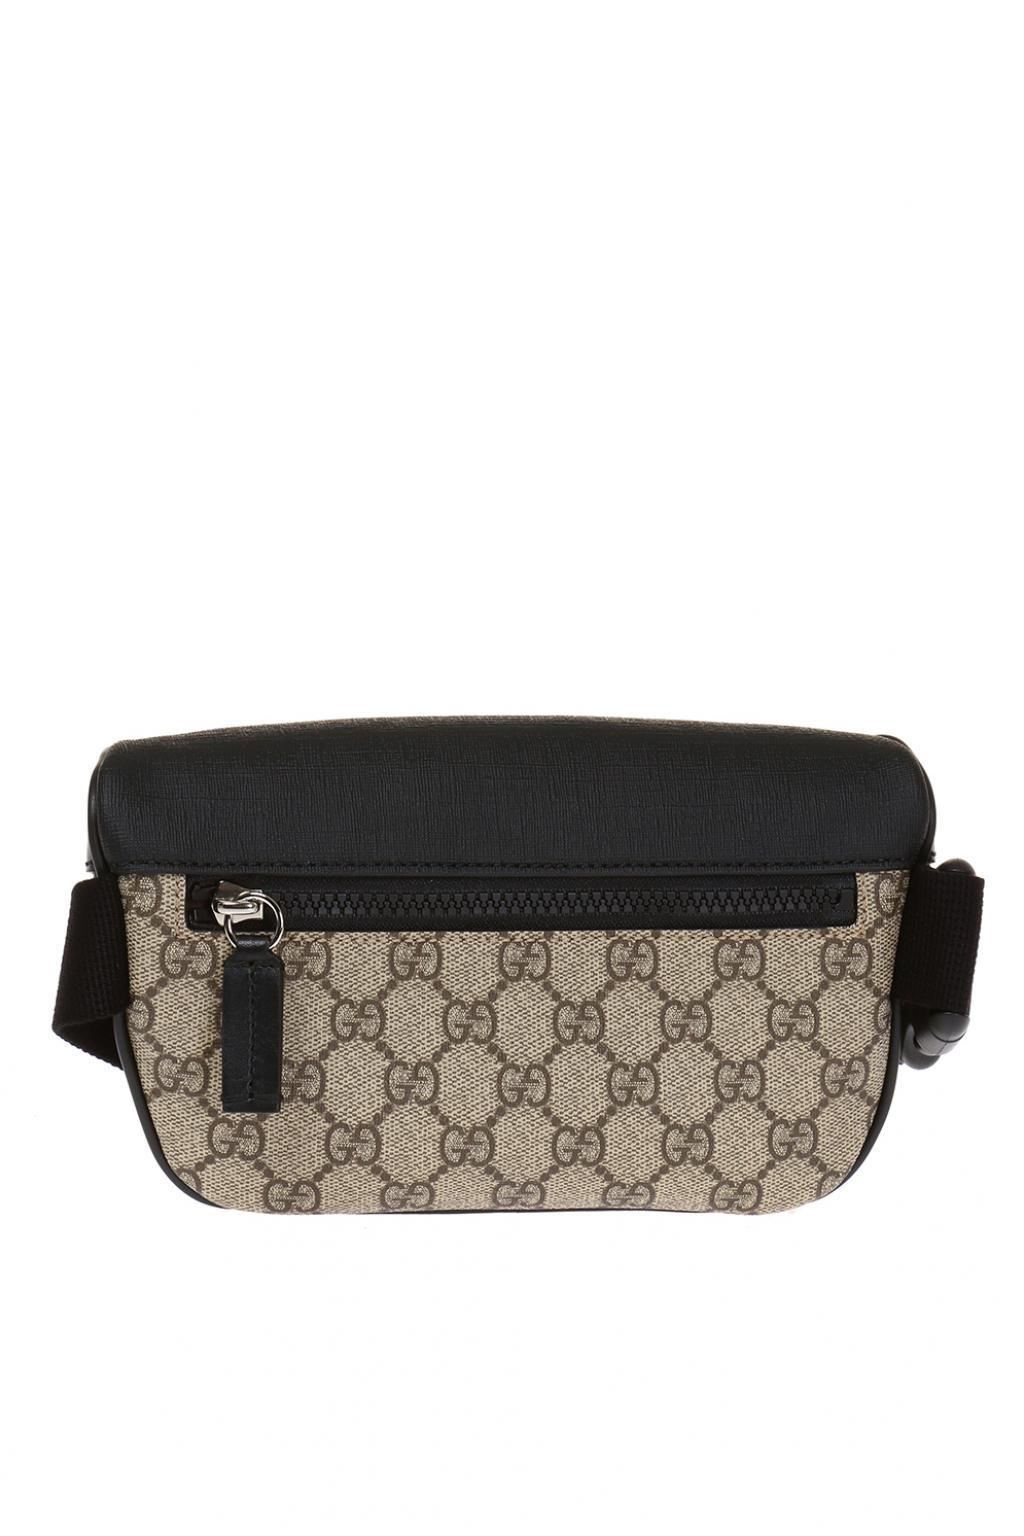 Gucci Leather &#39;GG Supreme&#39; Fabric Belt Bag in Brown for Men - Lyst